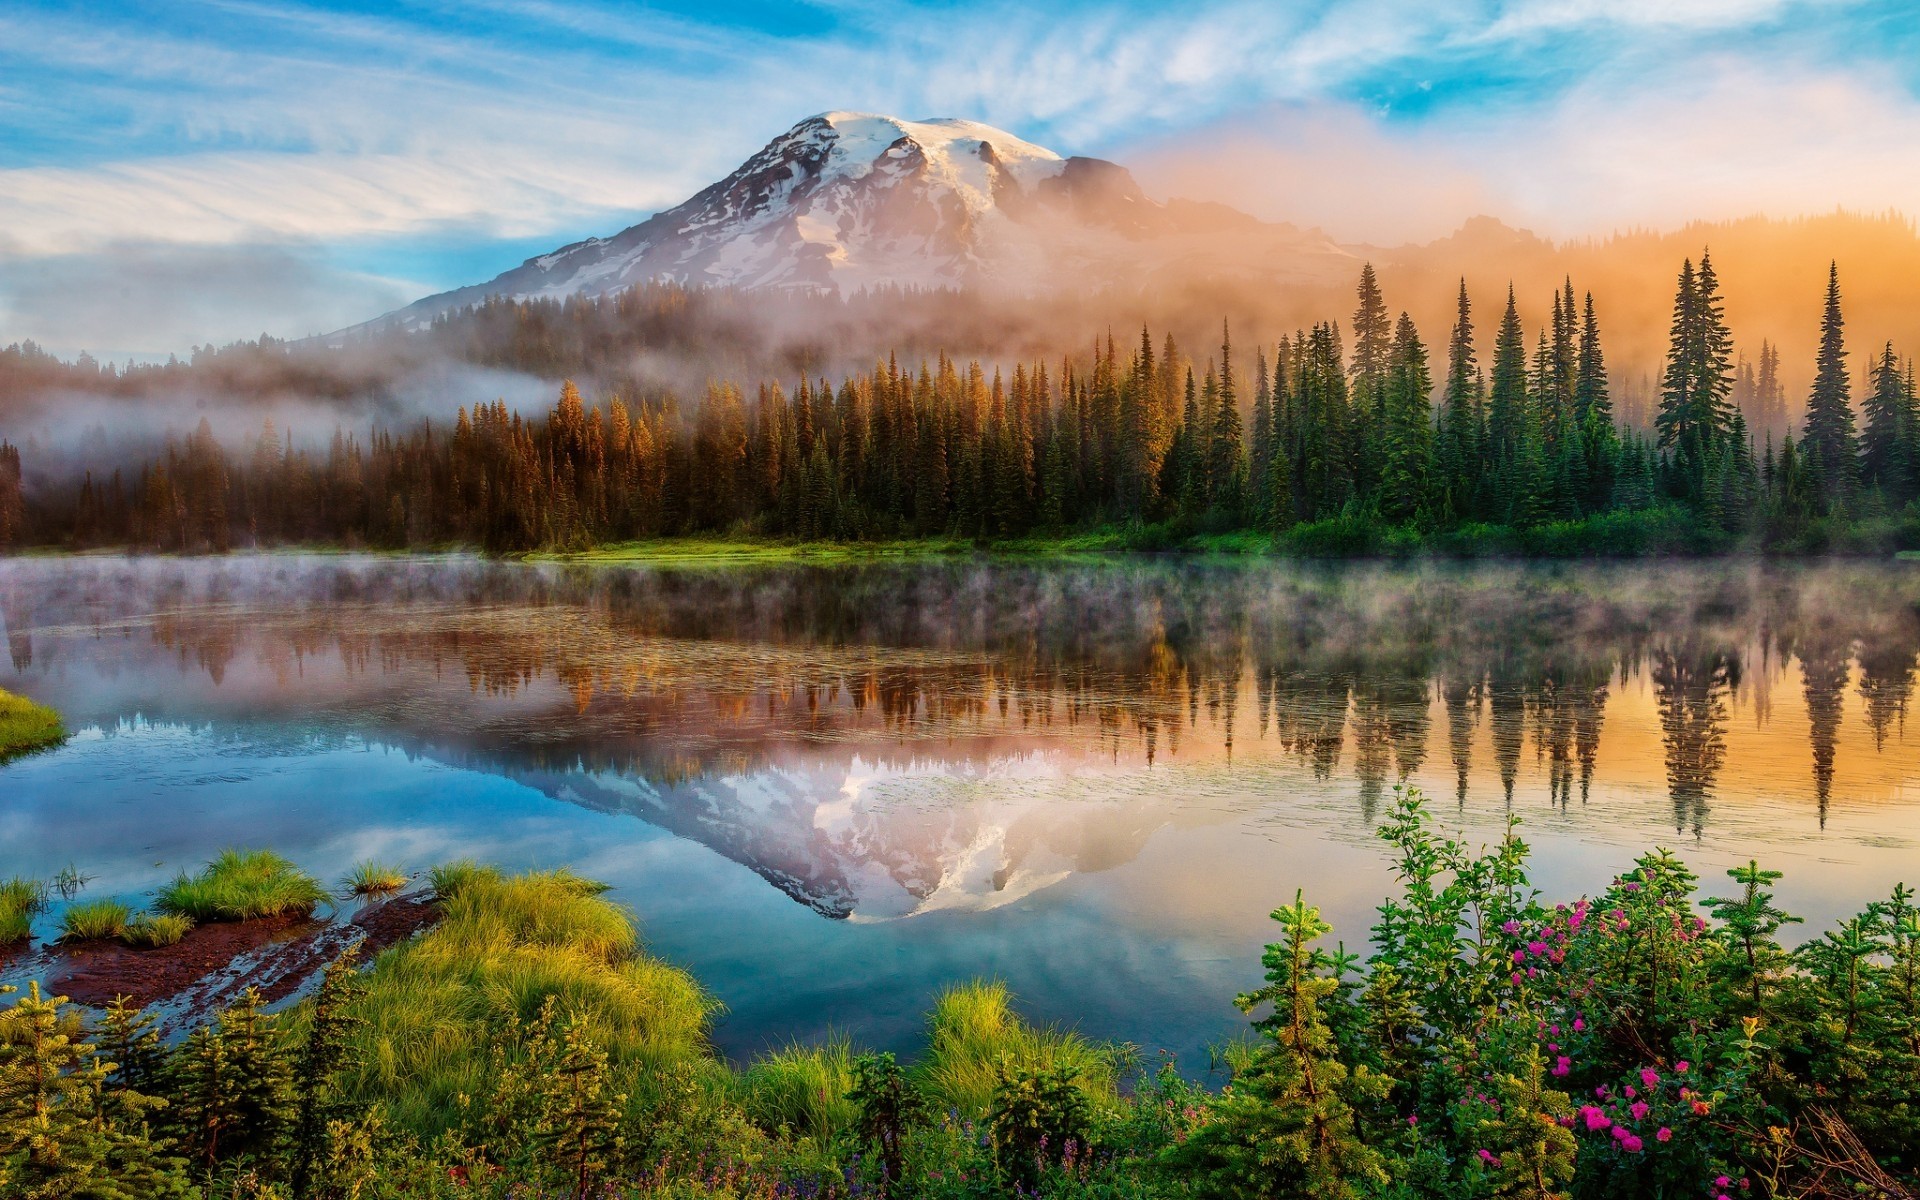 united states lake water landscape nature outdoors dawn reflection mountain travel scenic snow fall wood sky sunset mount rainier mountains